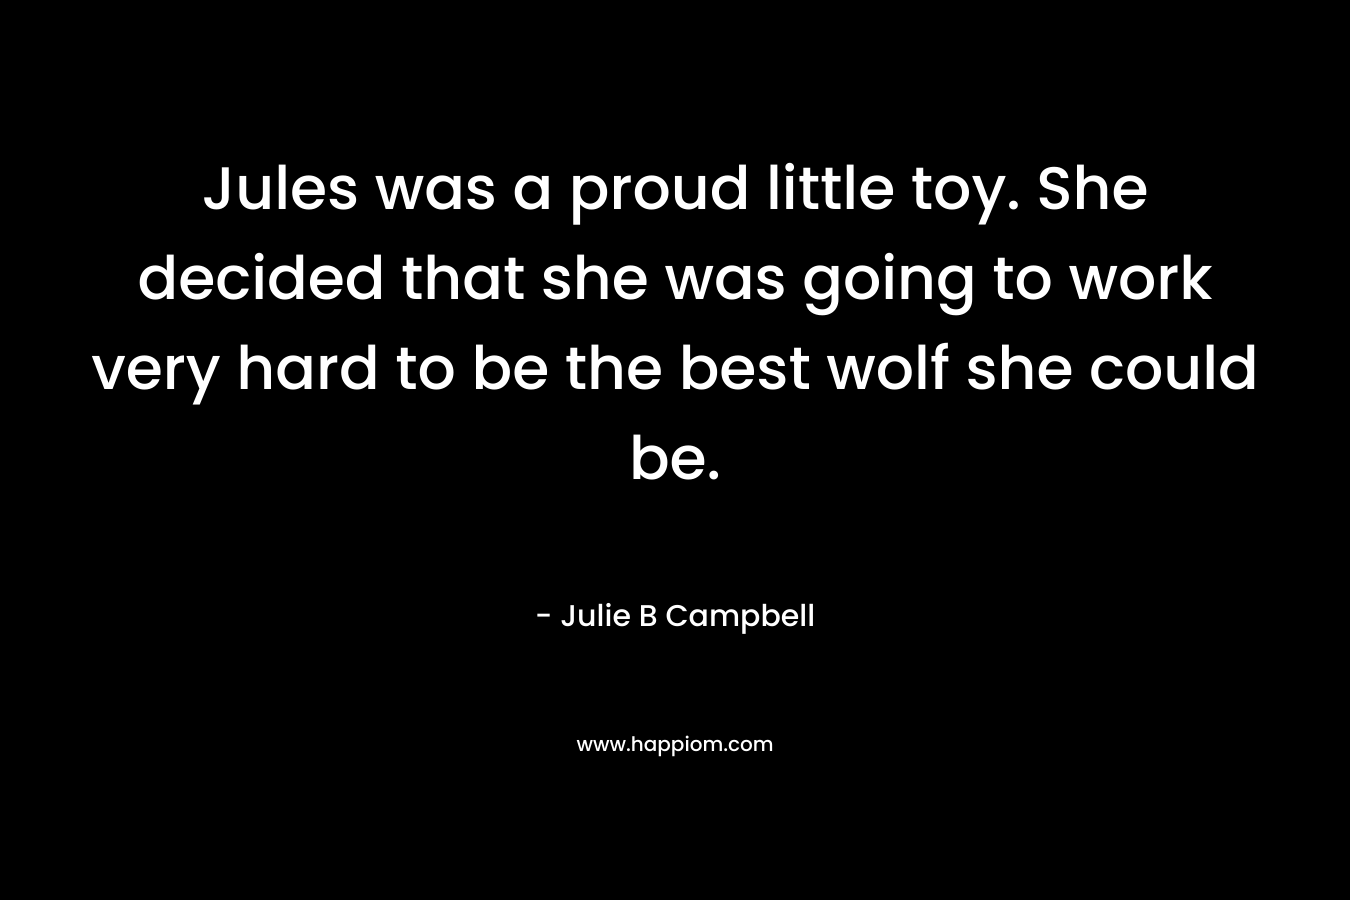 Jules was a proud little toy. She decided that she was going to work very hard to be the best wolf she could be.